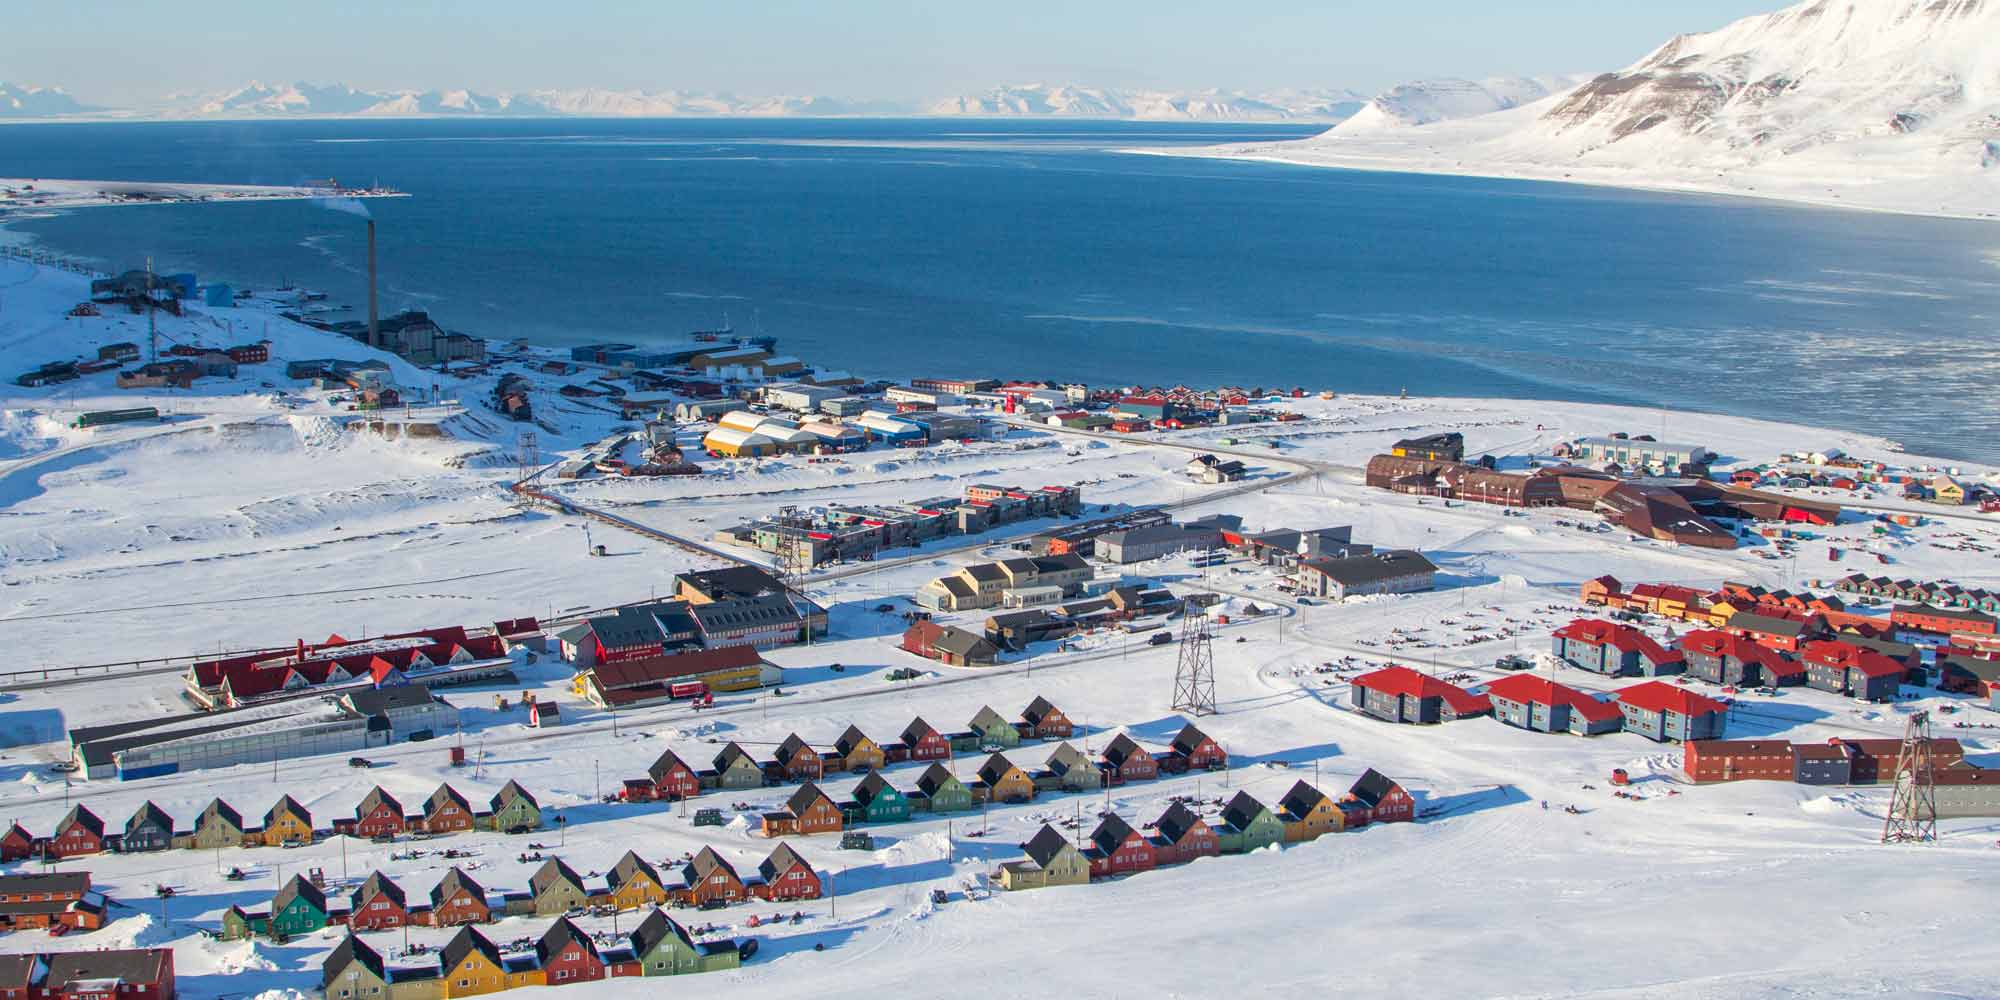 The town of Longyearbyen, Svalbard,  seen from the air